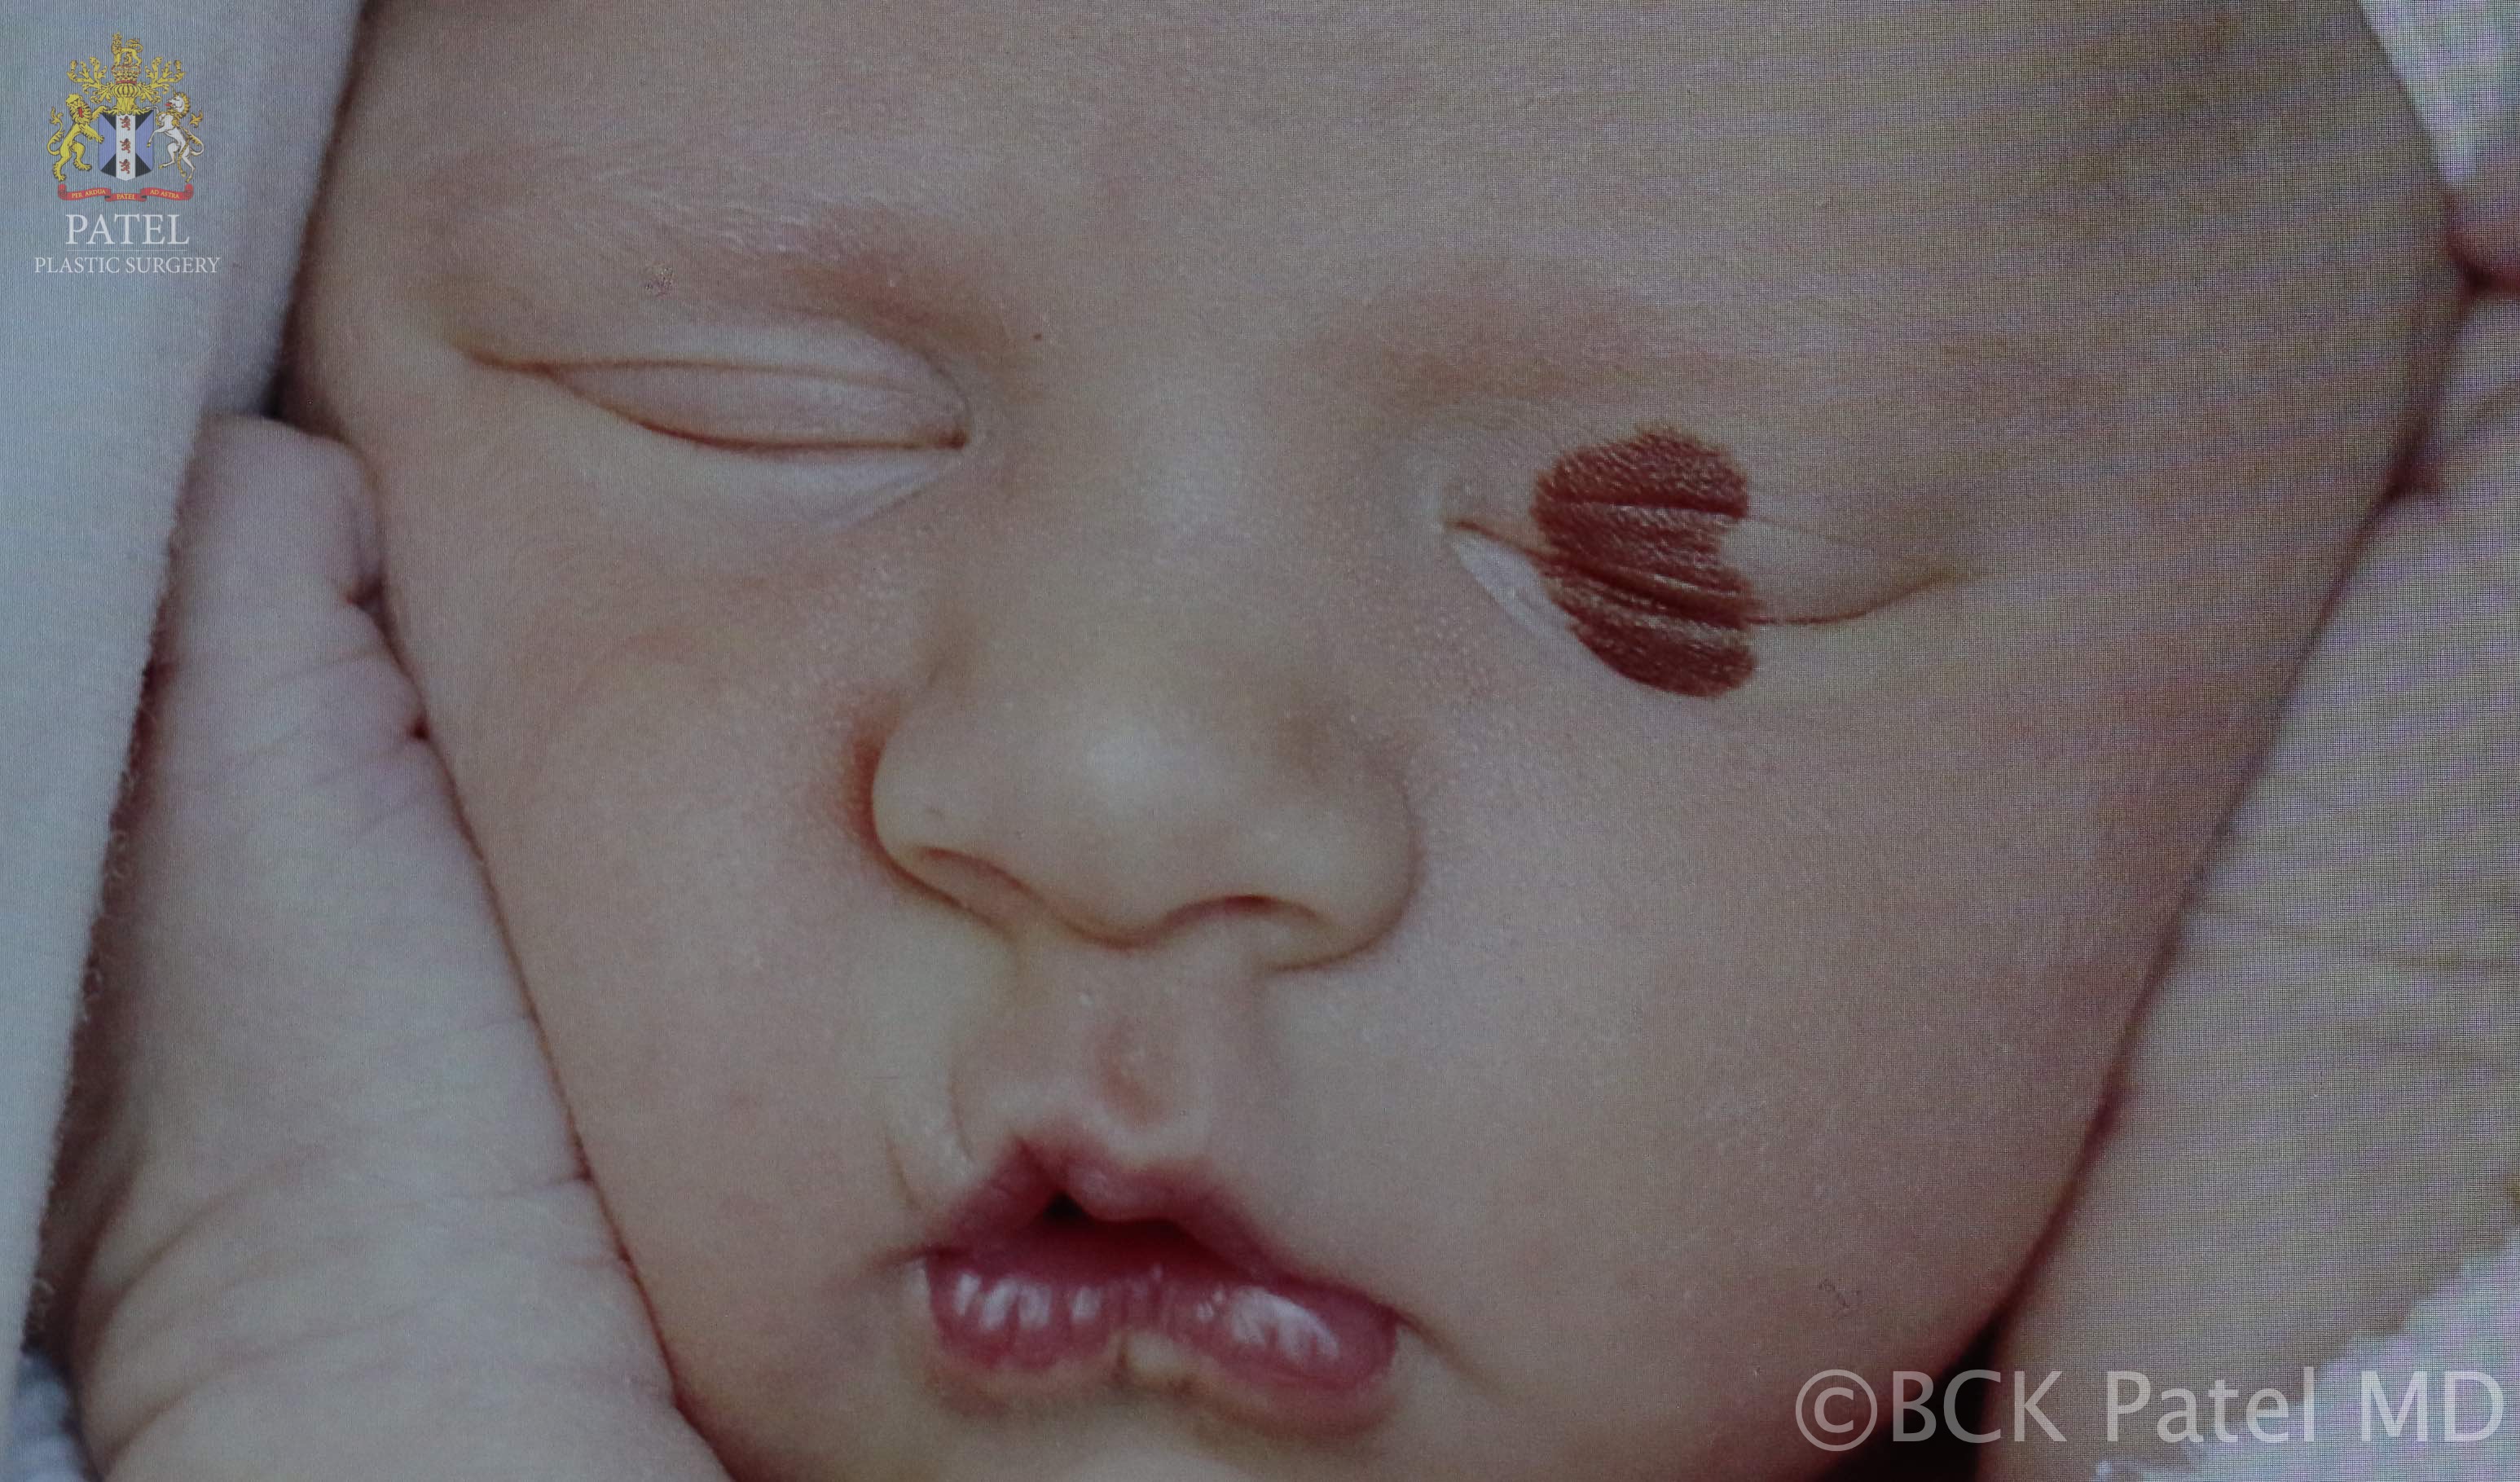 Congenital melanocytes nevus: also known as a "kissing nevus" in a newborn